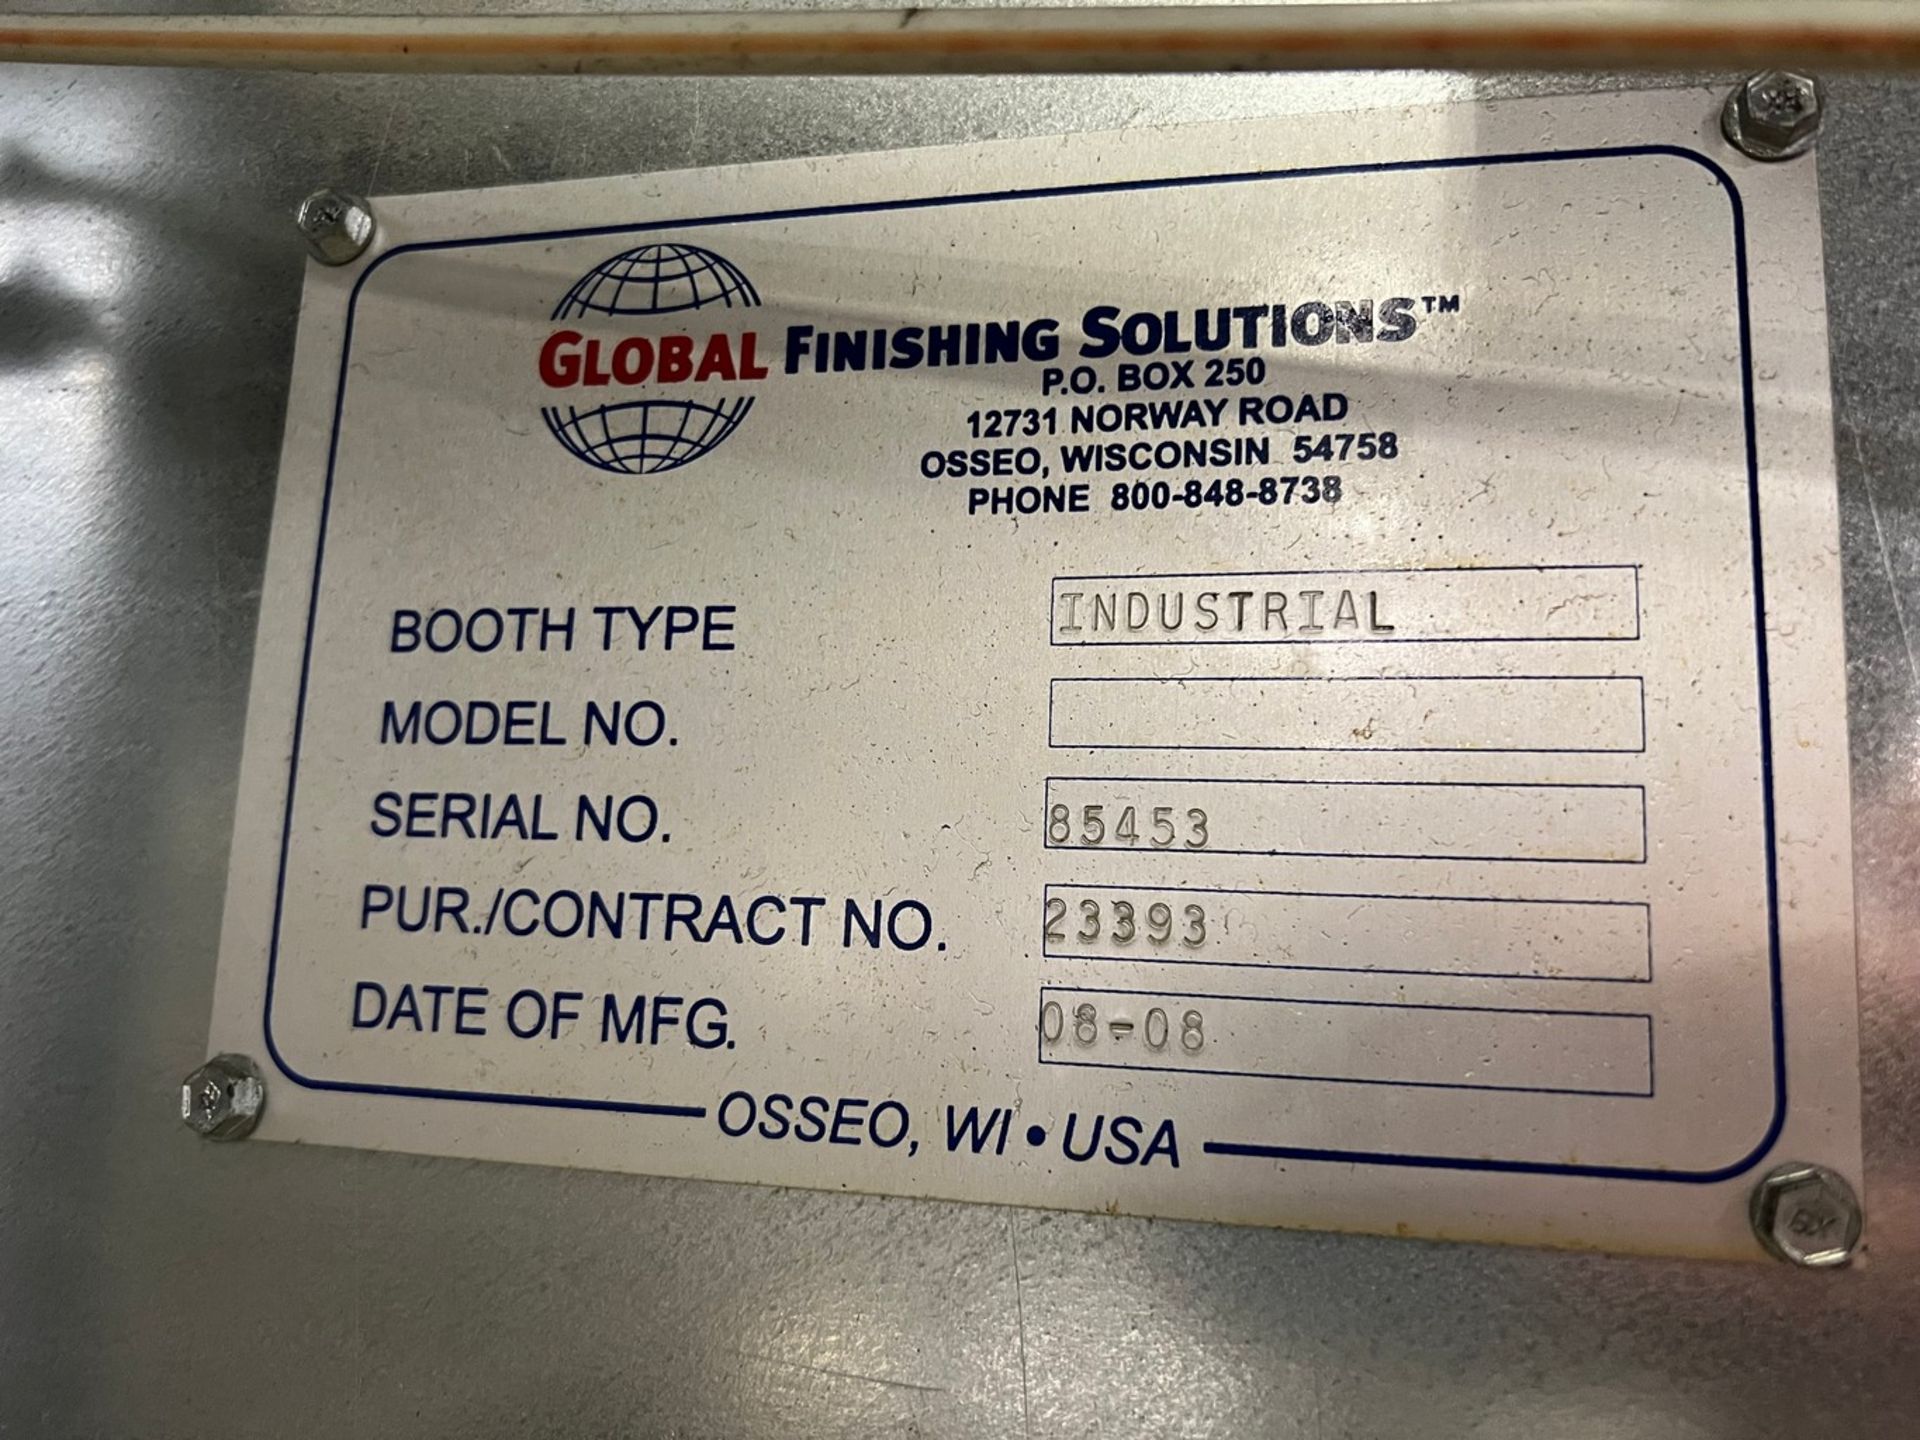 Global Finishing Solutions Industrial Spray Booth, 104" x 60" x 120" - Image 2 of 7